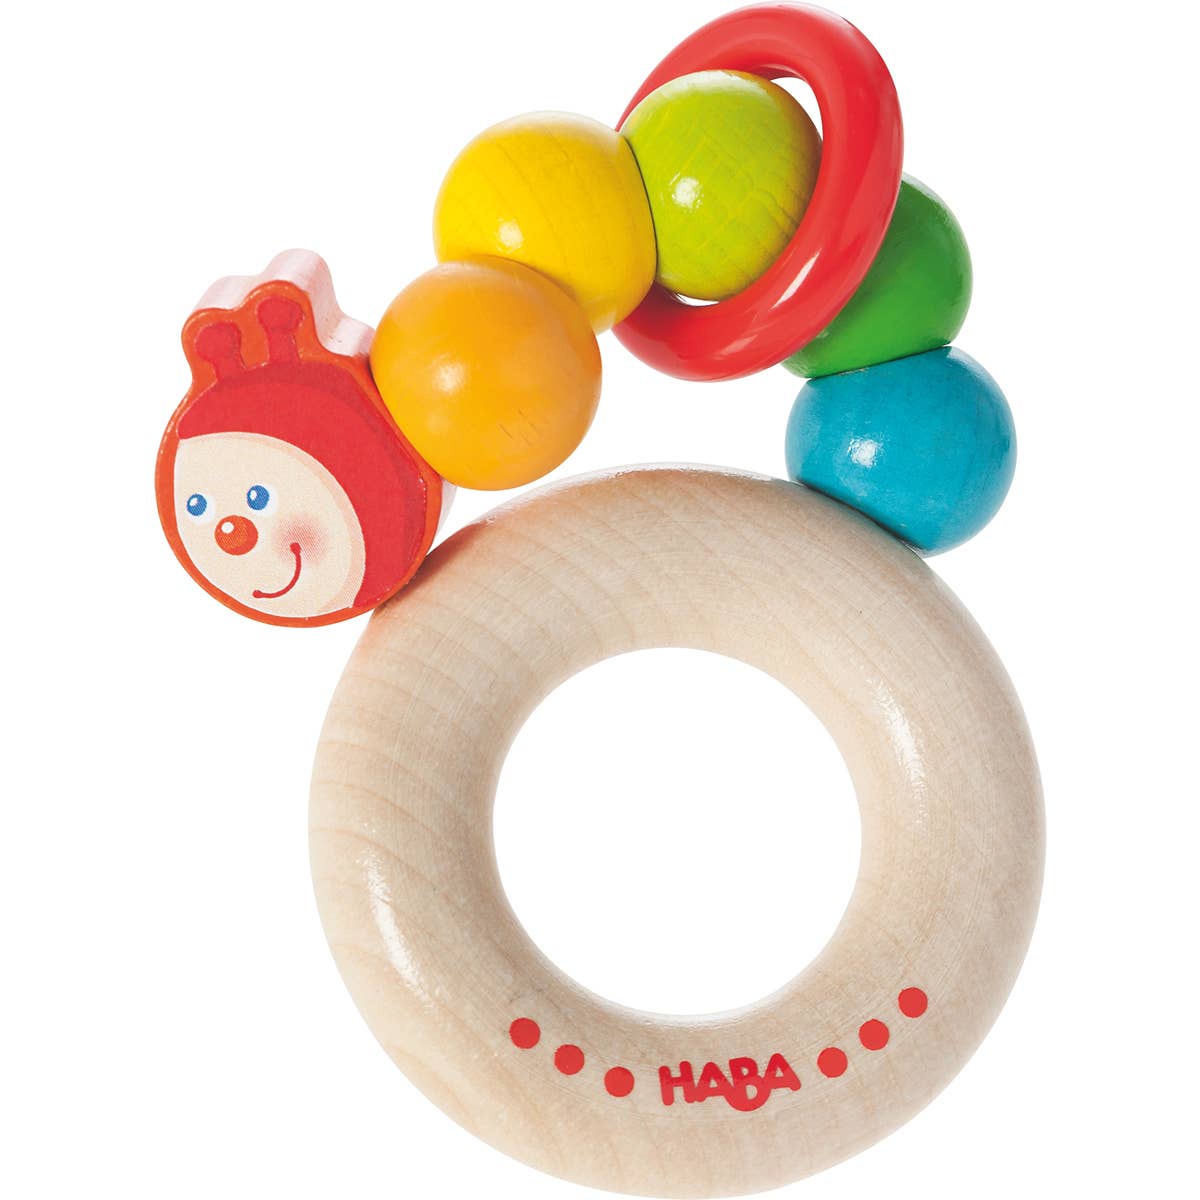 Haba Clutching Toy Rainbow Caterpillar - Crunch Natural Parenting is where to buy